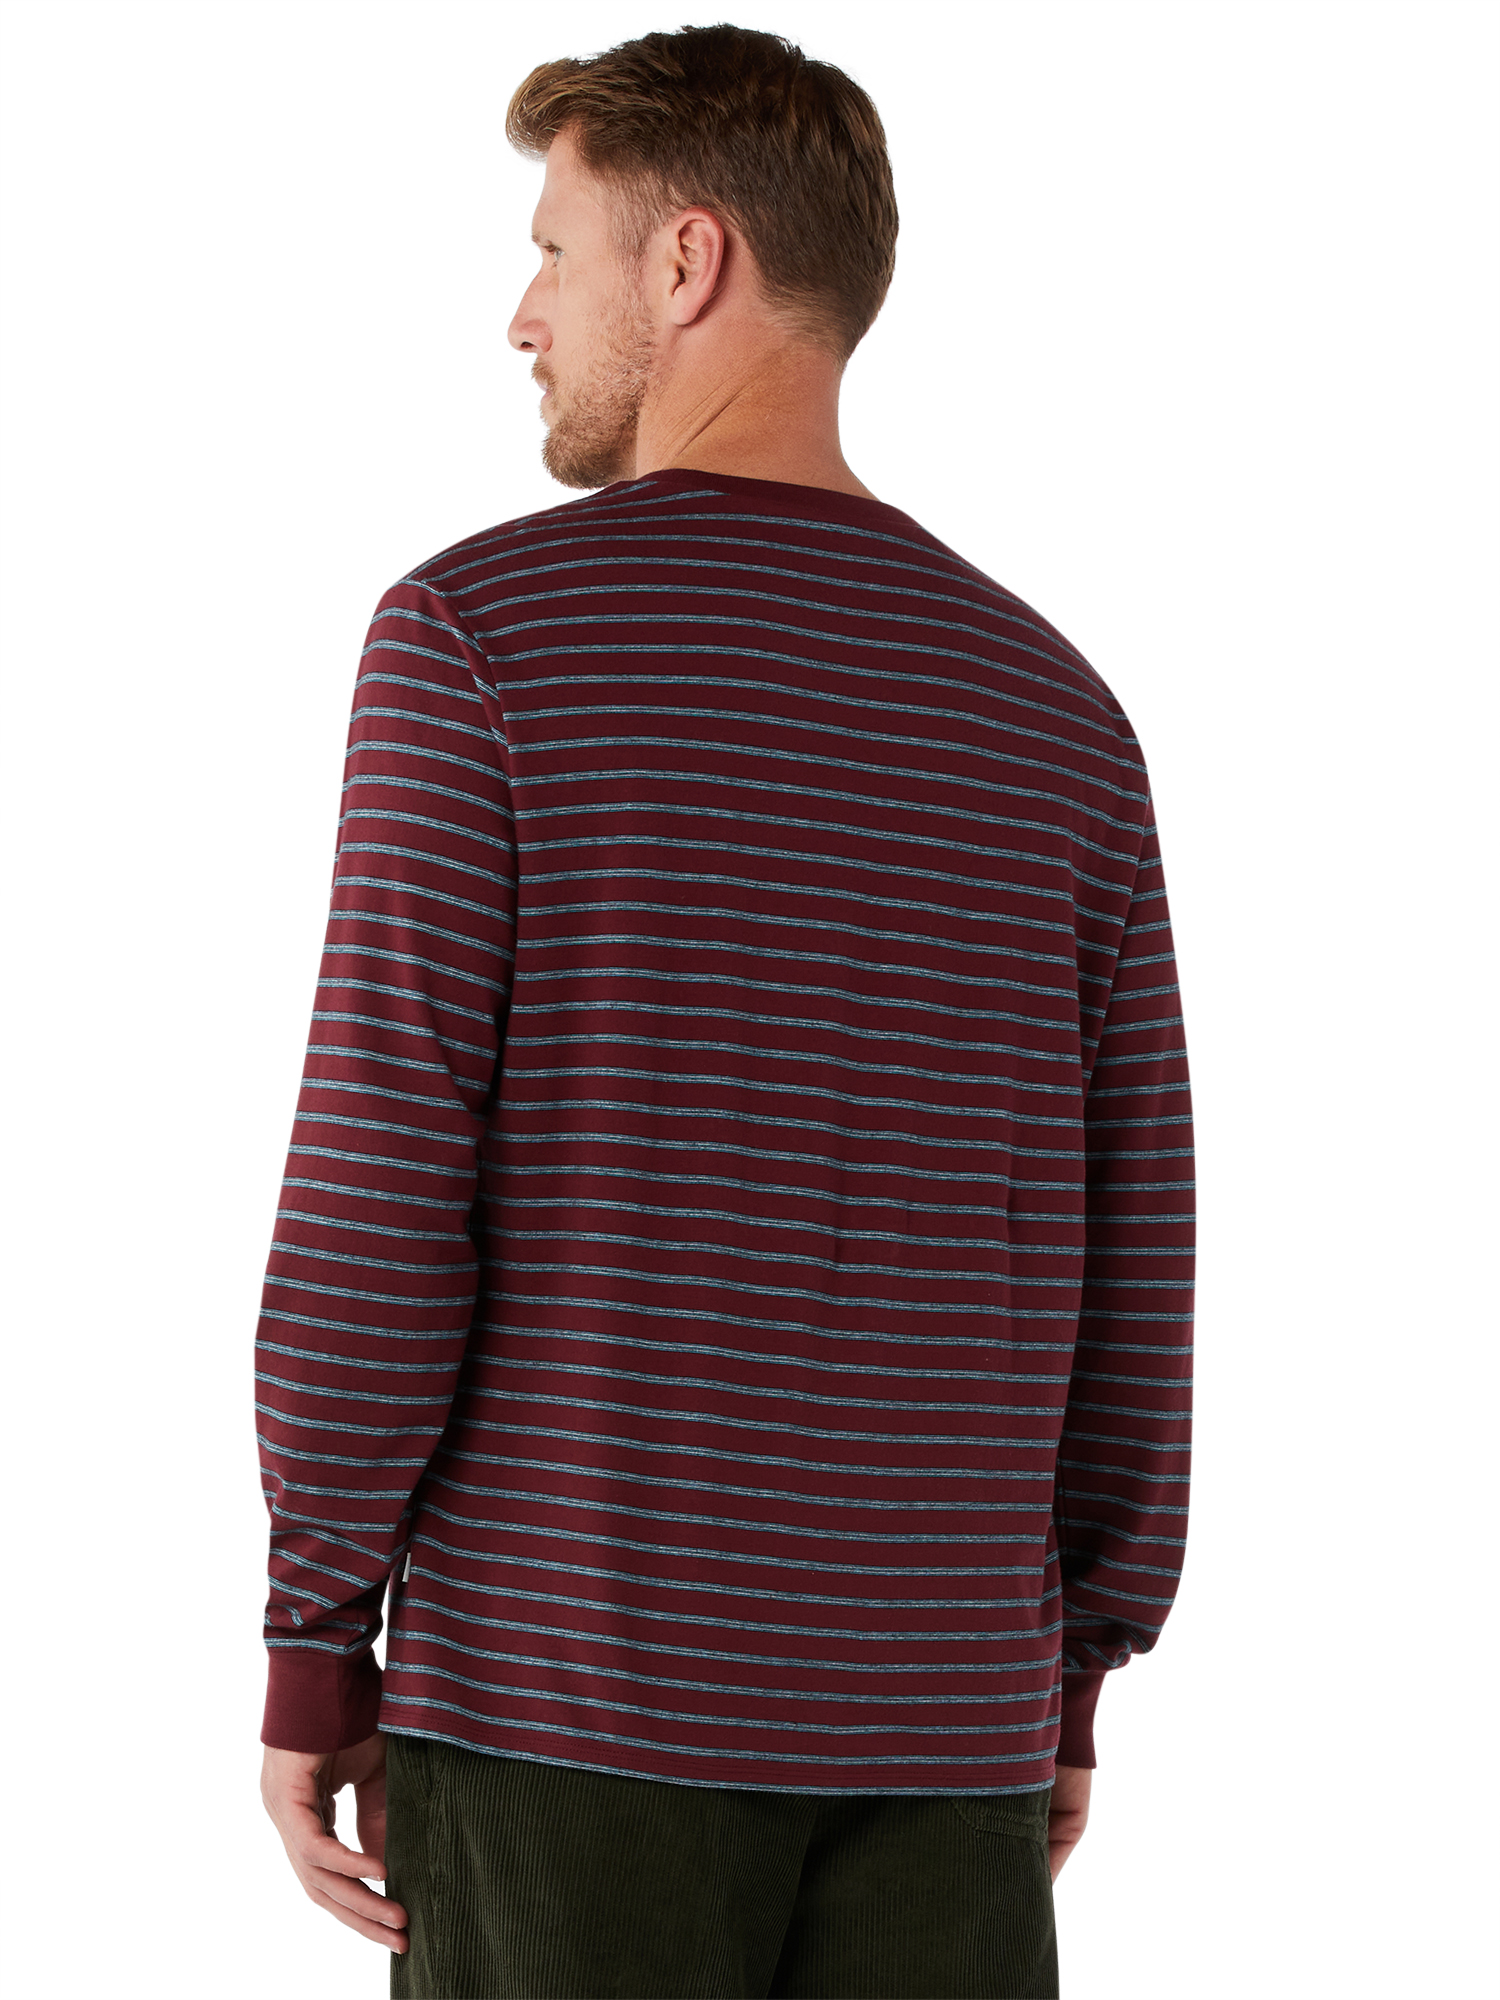 Free Assembly Men's Everyday Long Sleeve Pocket Tee - image 4 of 6